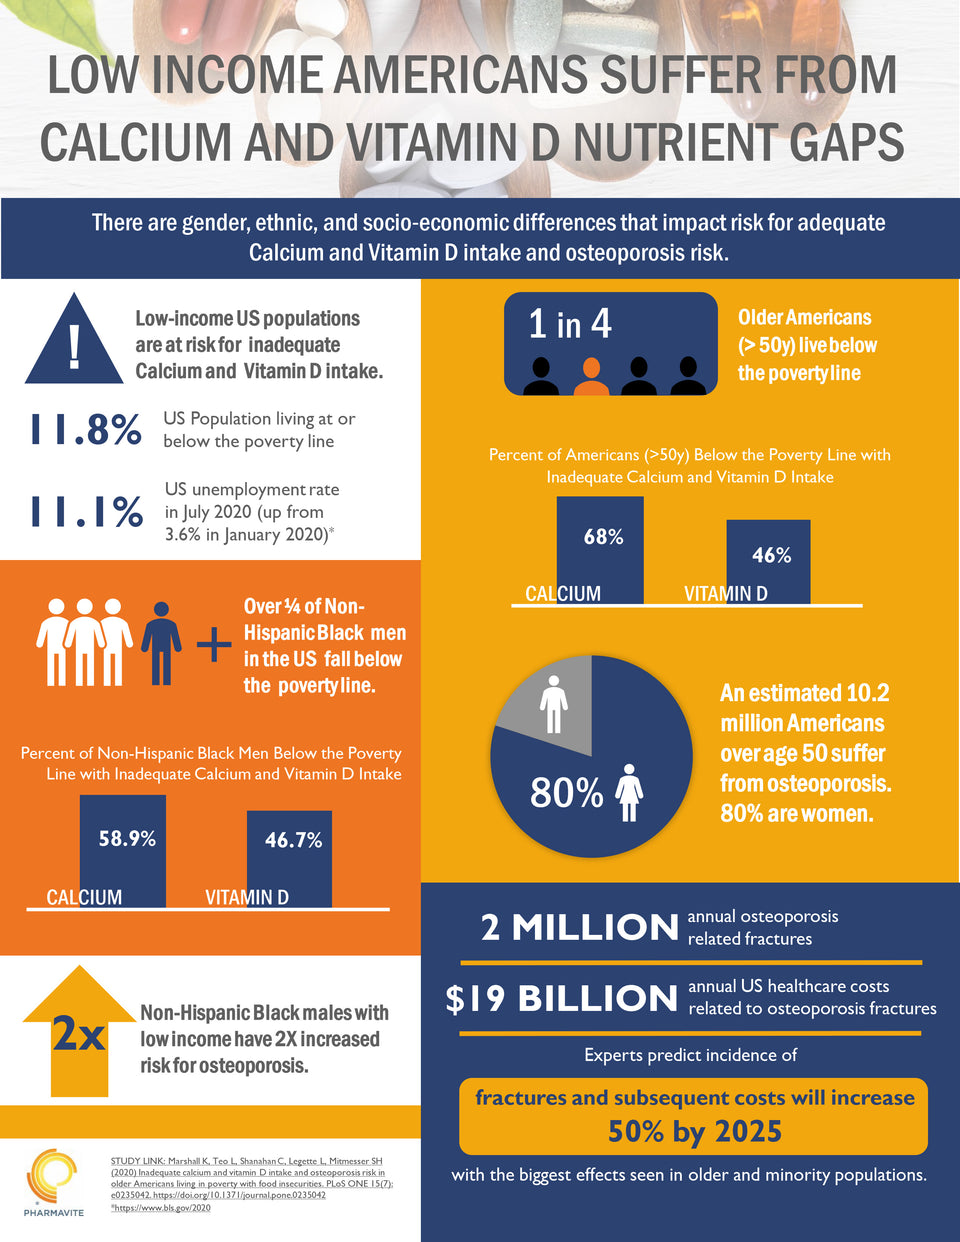 Inadequate calcium and vitamin D intake and osteoporosis risk in older Americans living in poverty with food insecurities (2020)